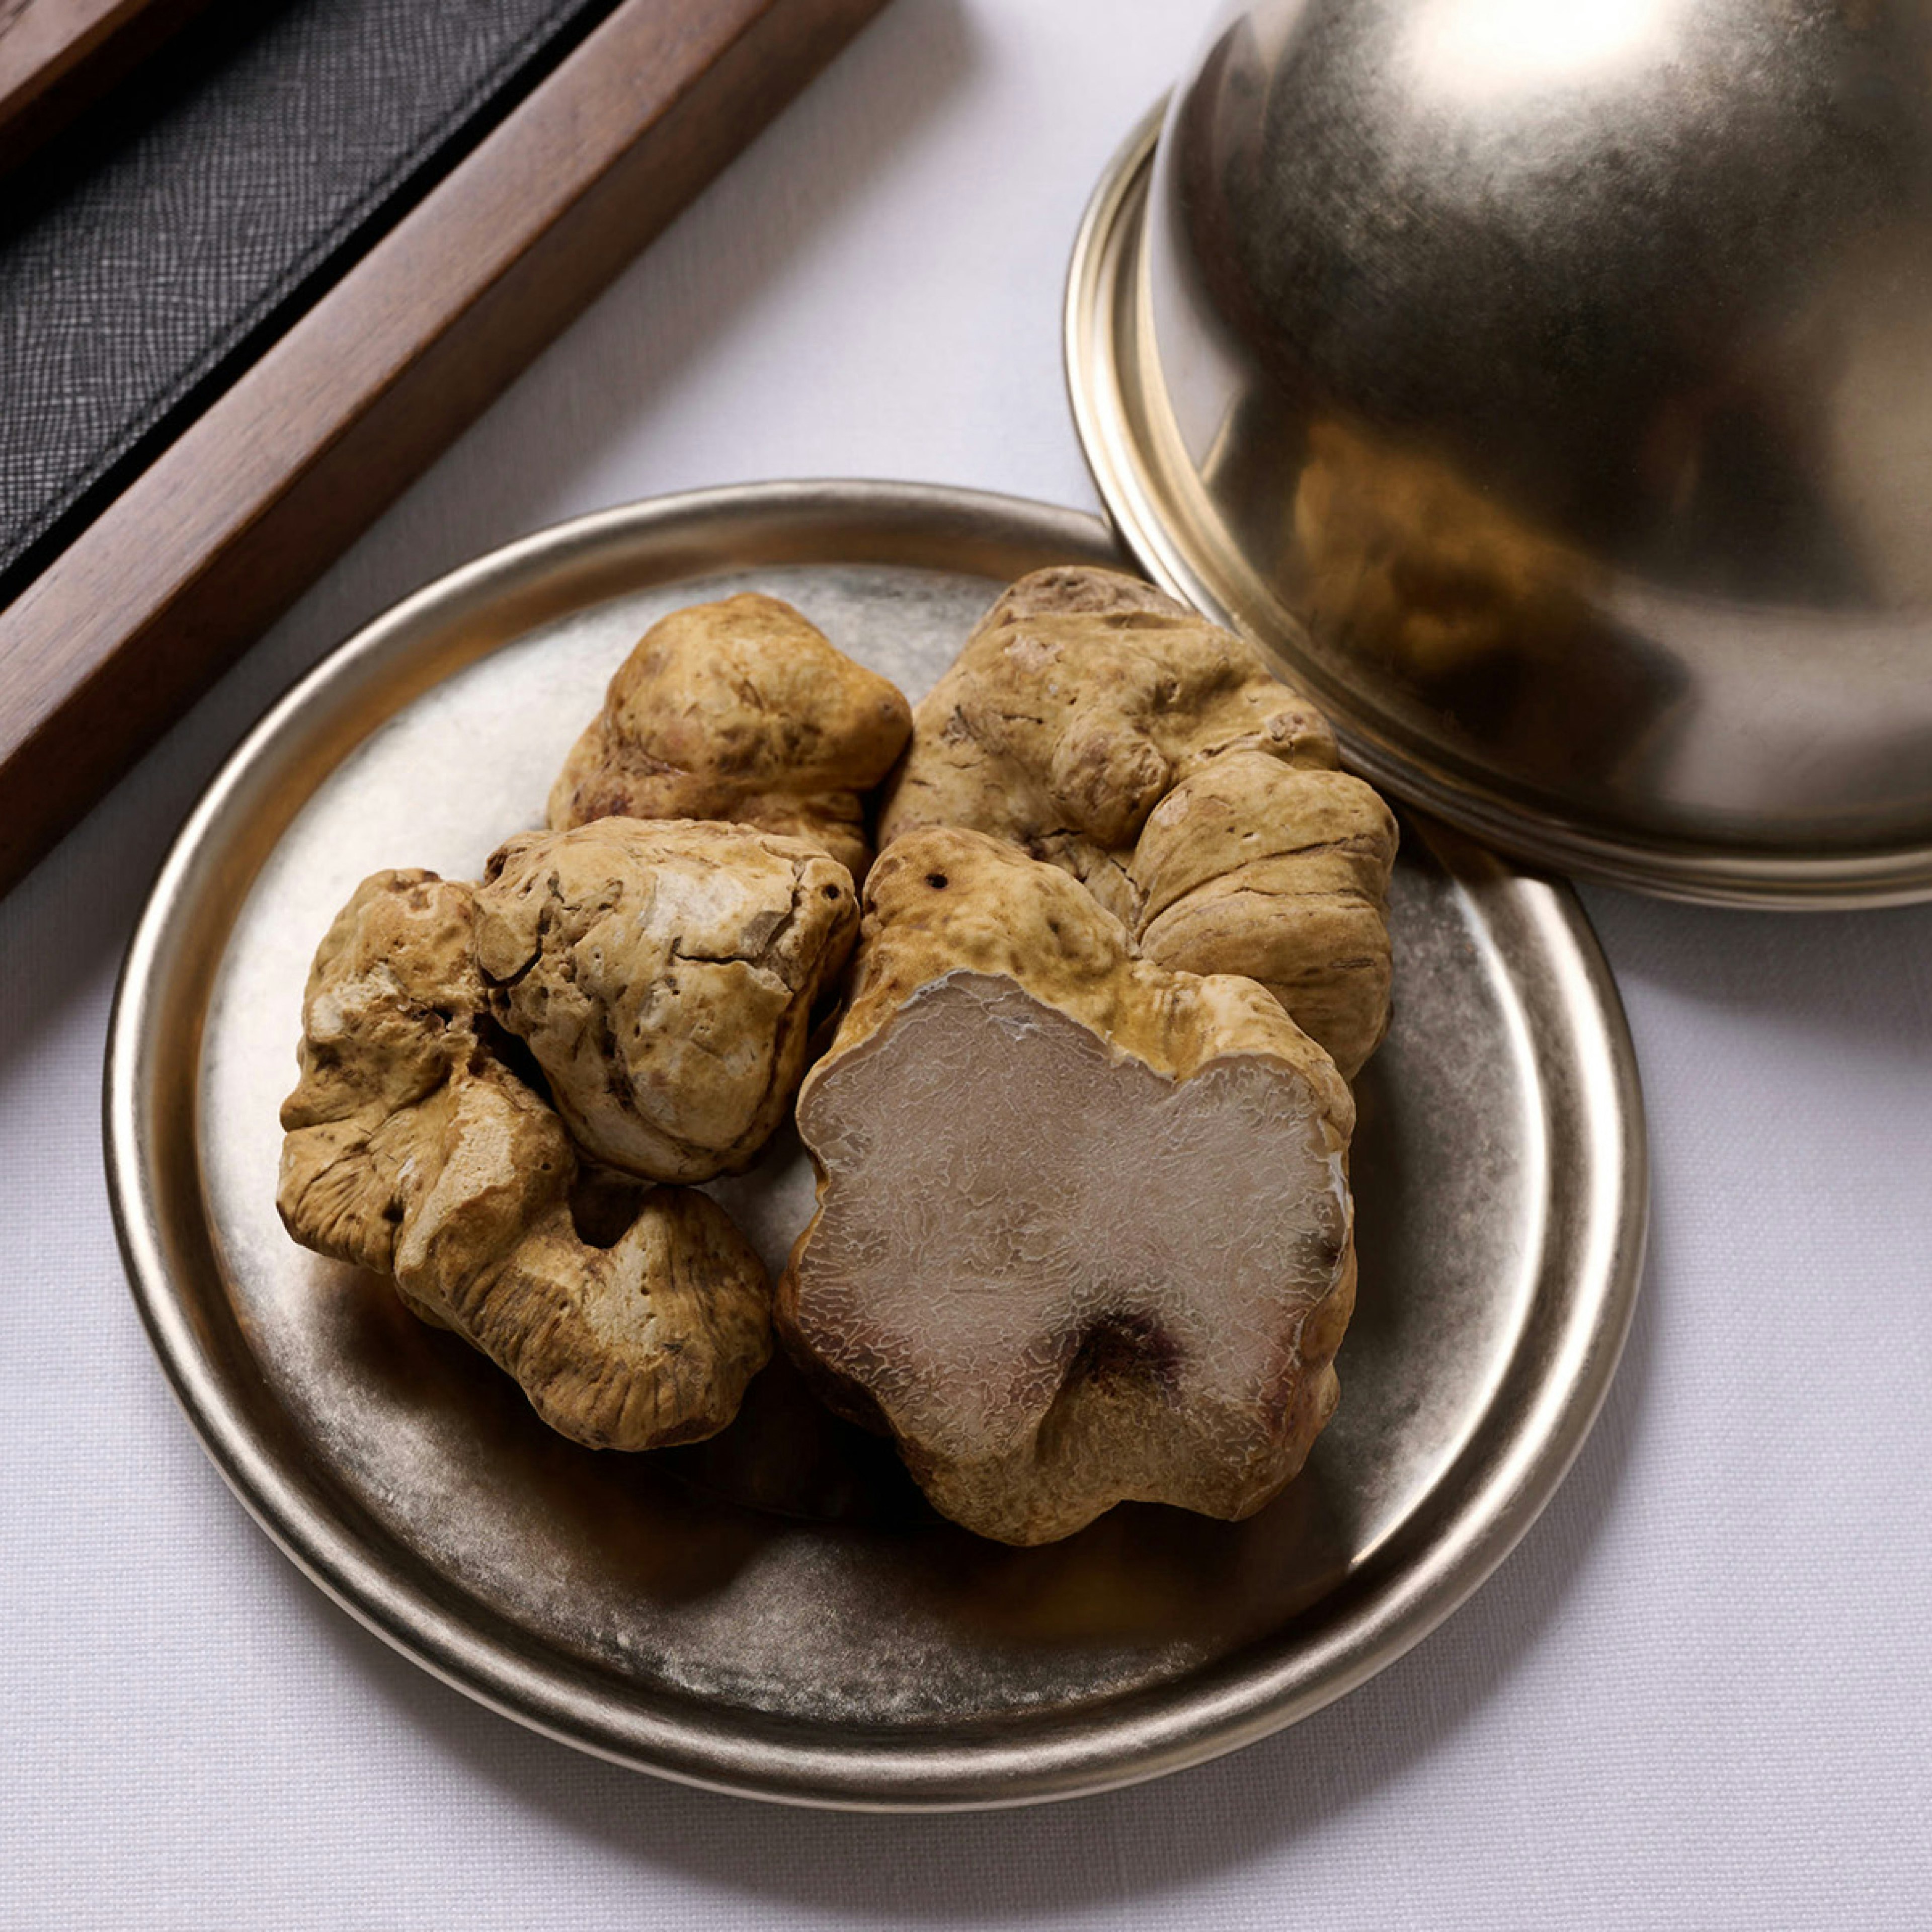 inspiration is everywhere - even inside a white truffle 